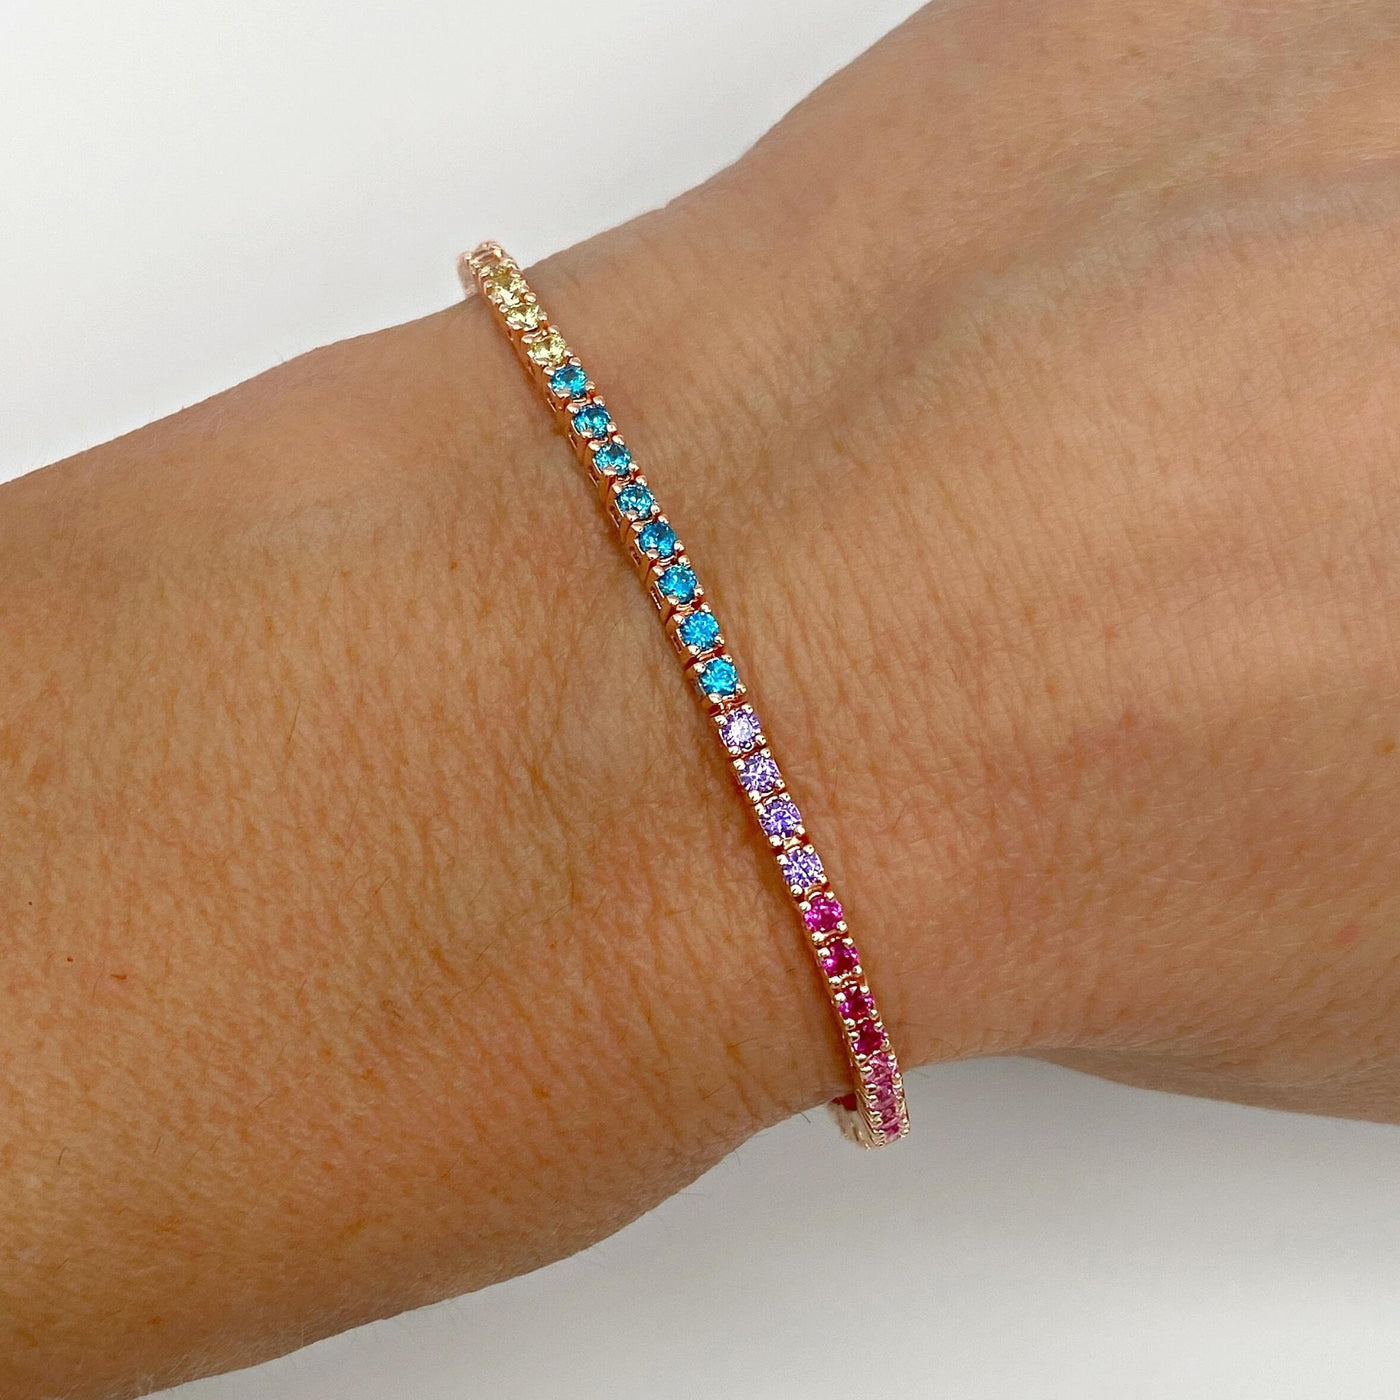 Silver casting tennis bracelet with rainbow stones - 2 mm